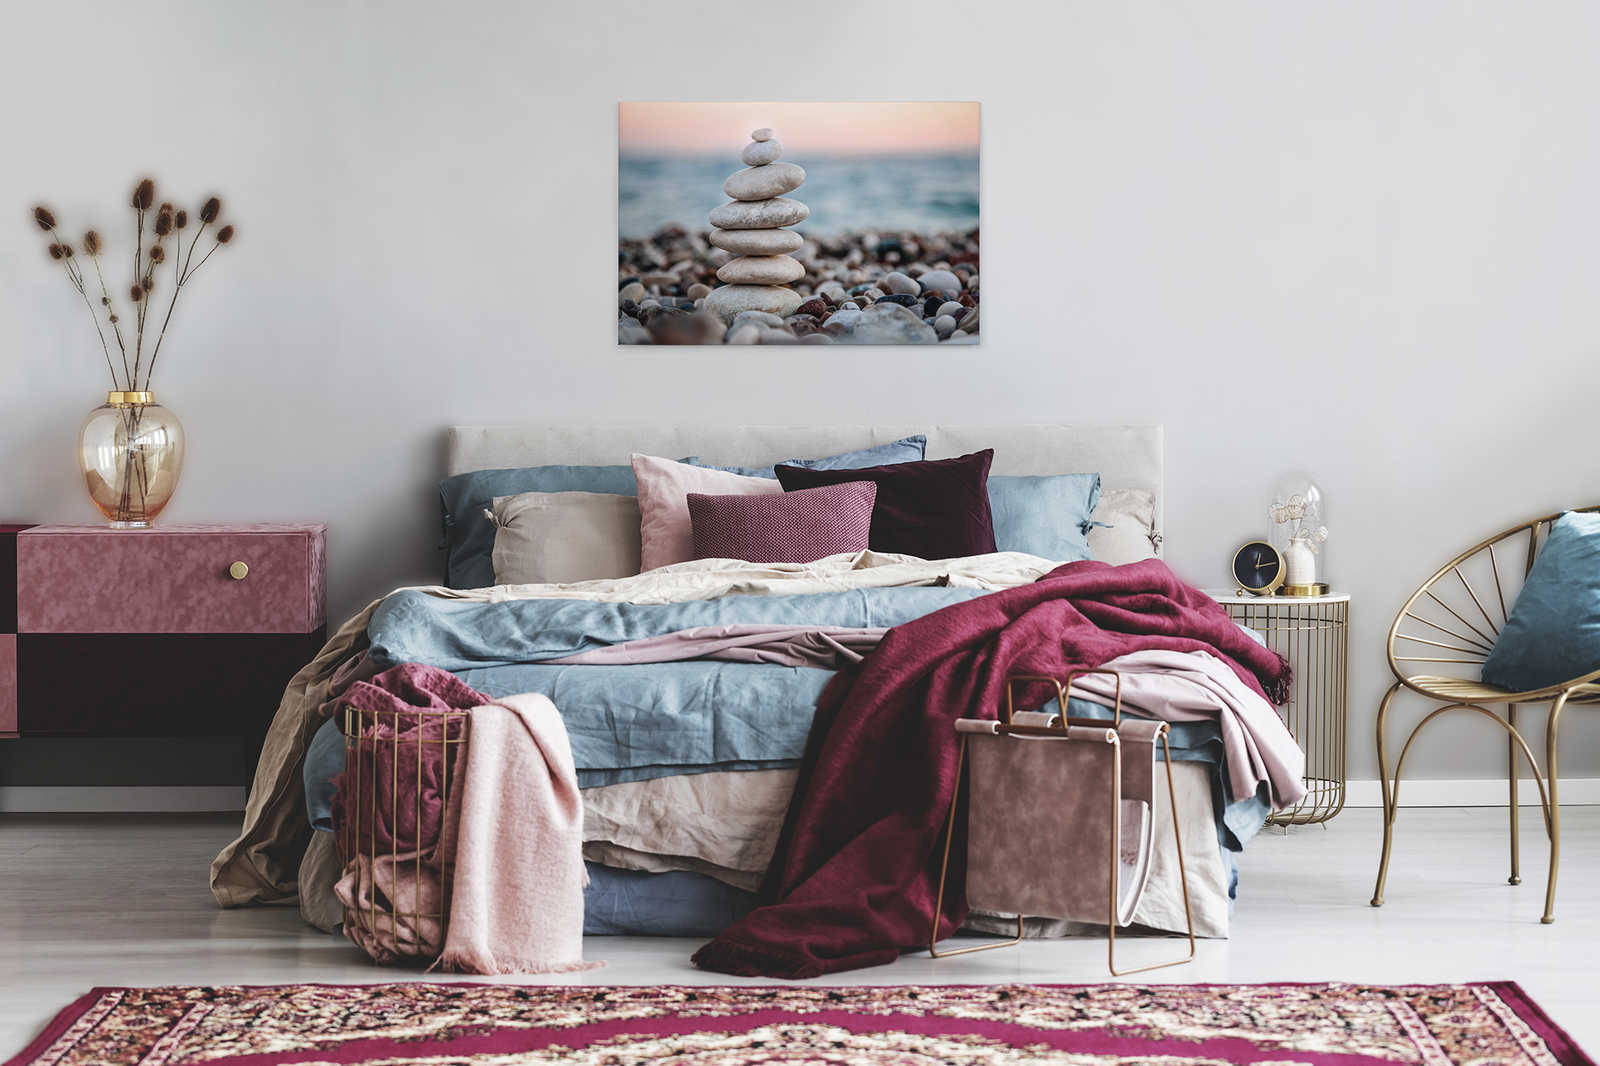             Canvas with stone tower by the sea | grey, blue - 0.90 m x 0.60 m
        